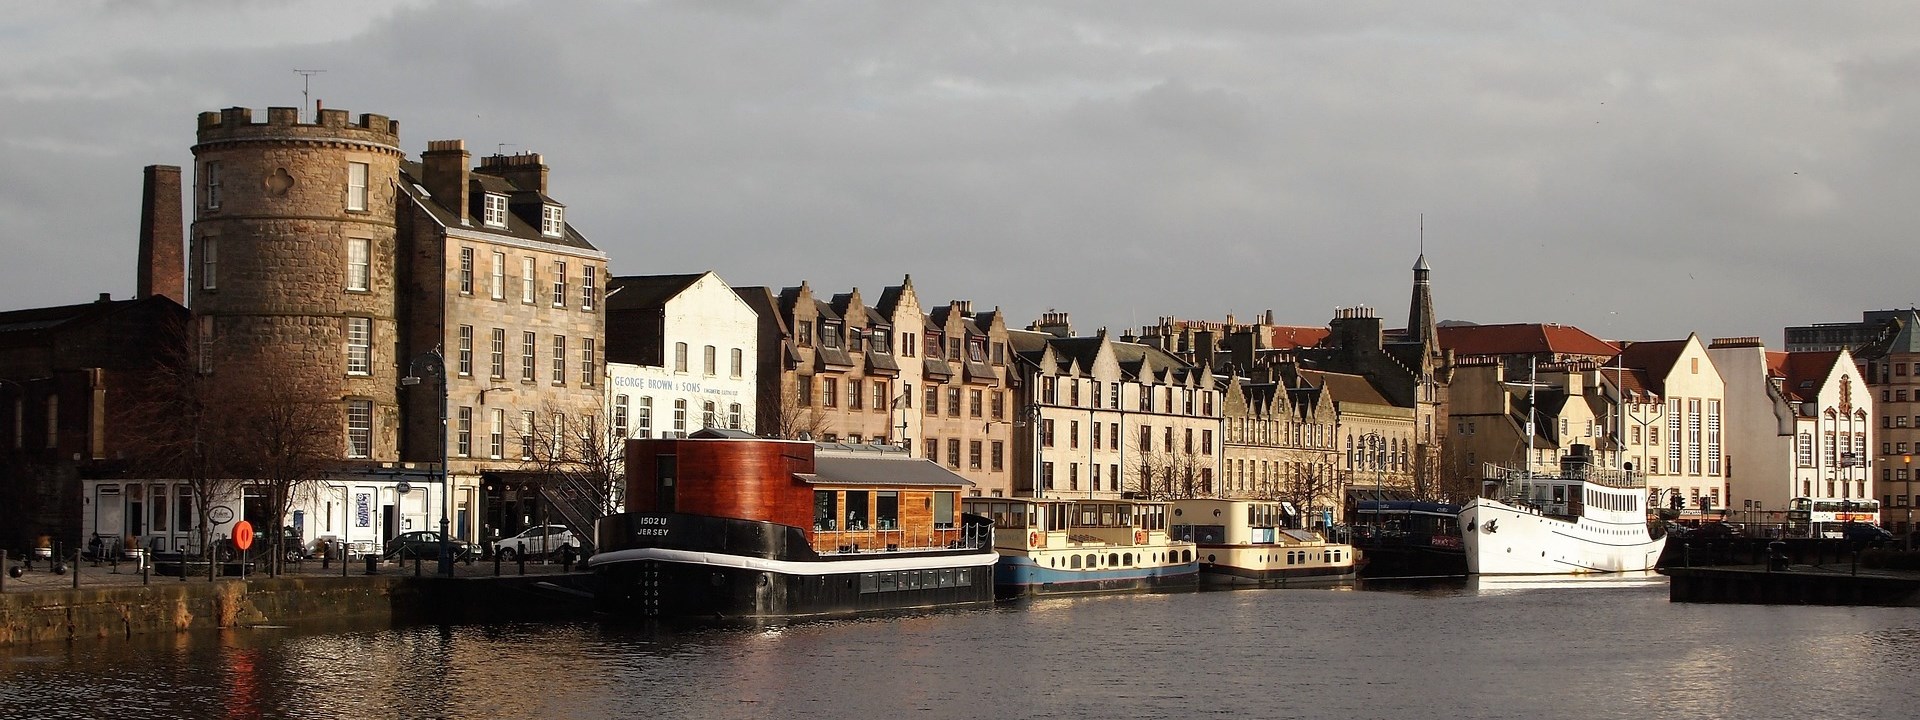 Port of Leith